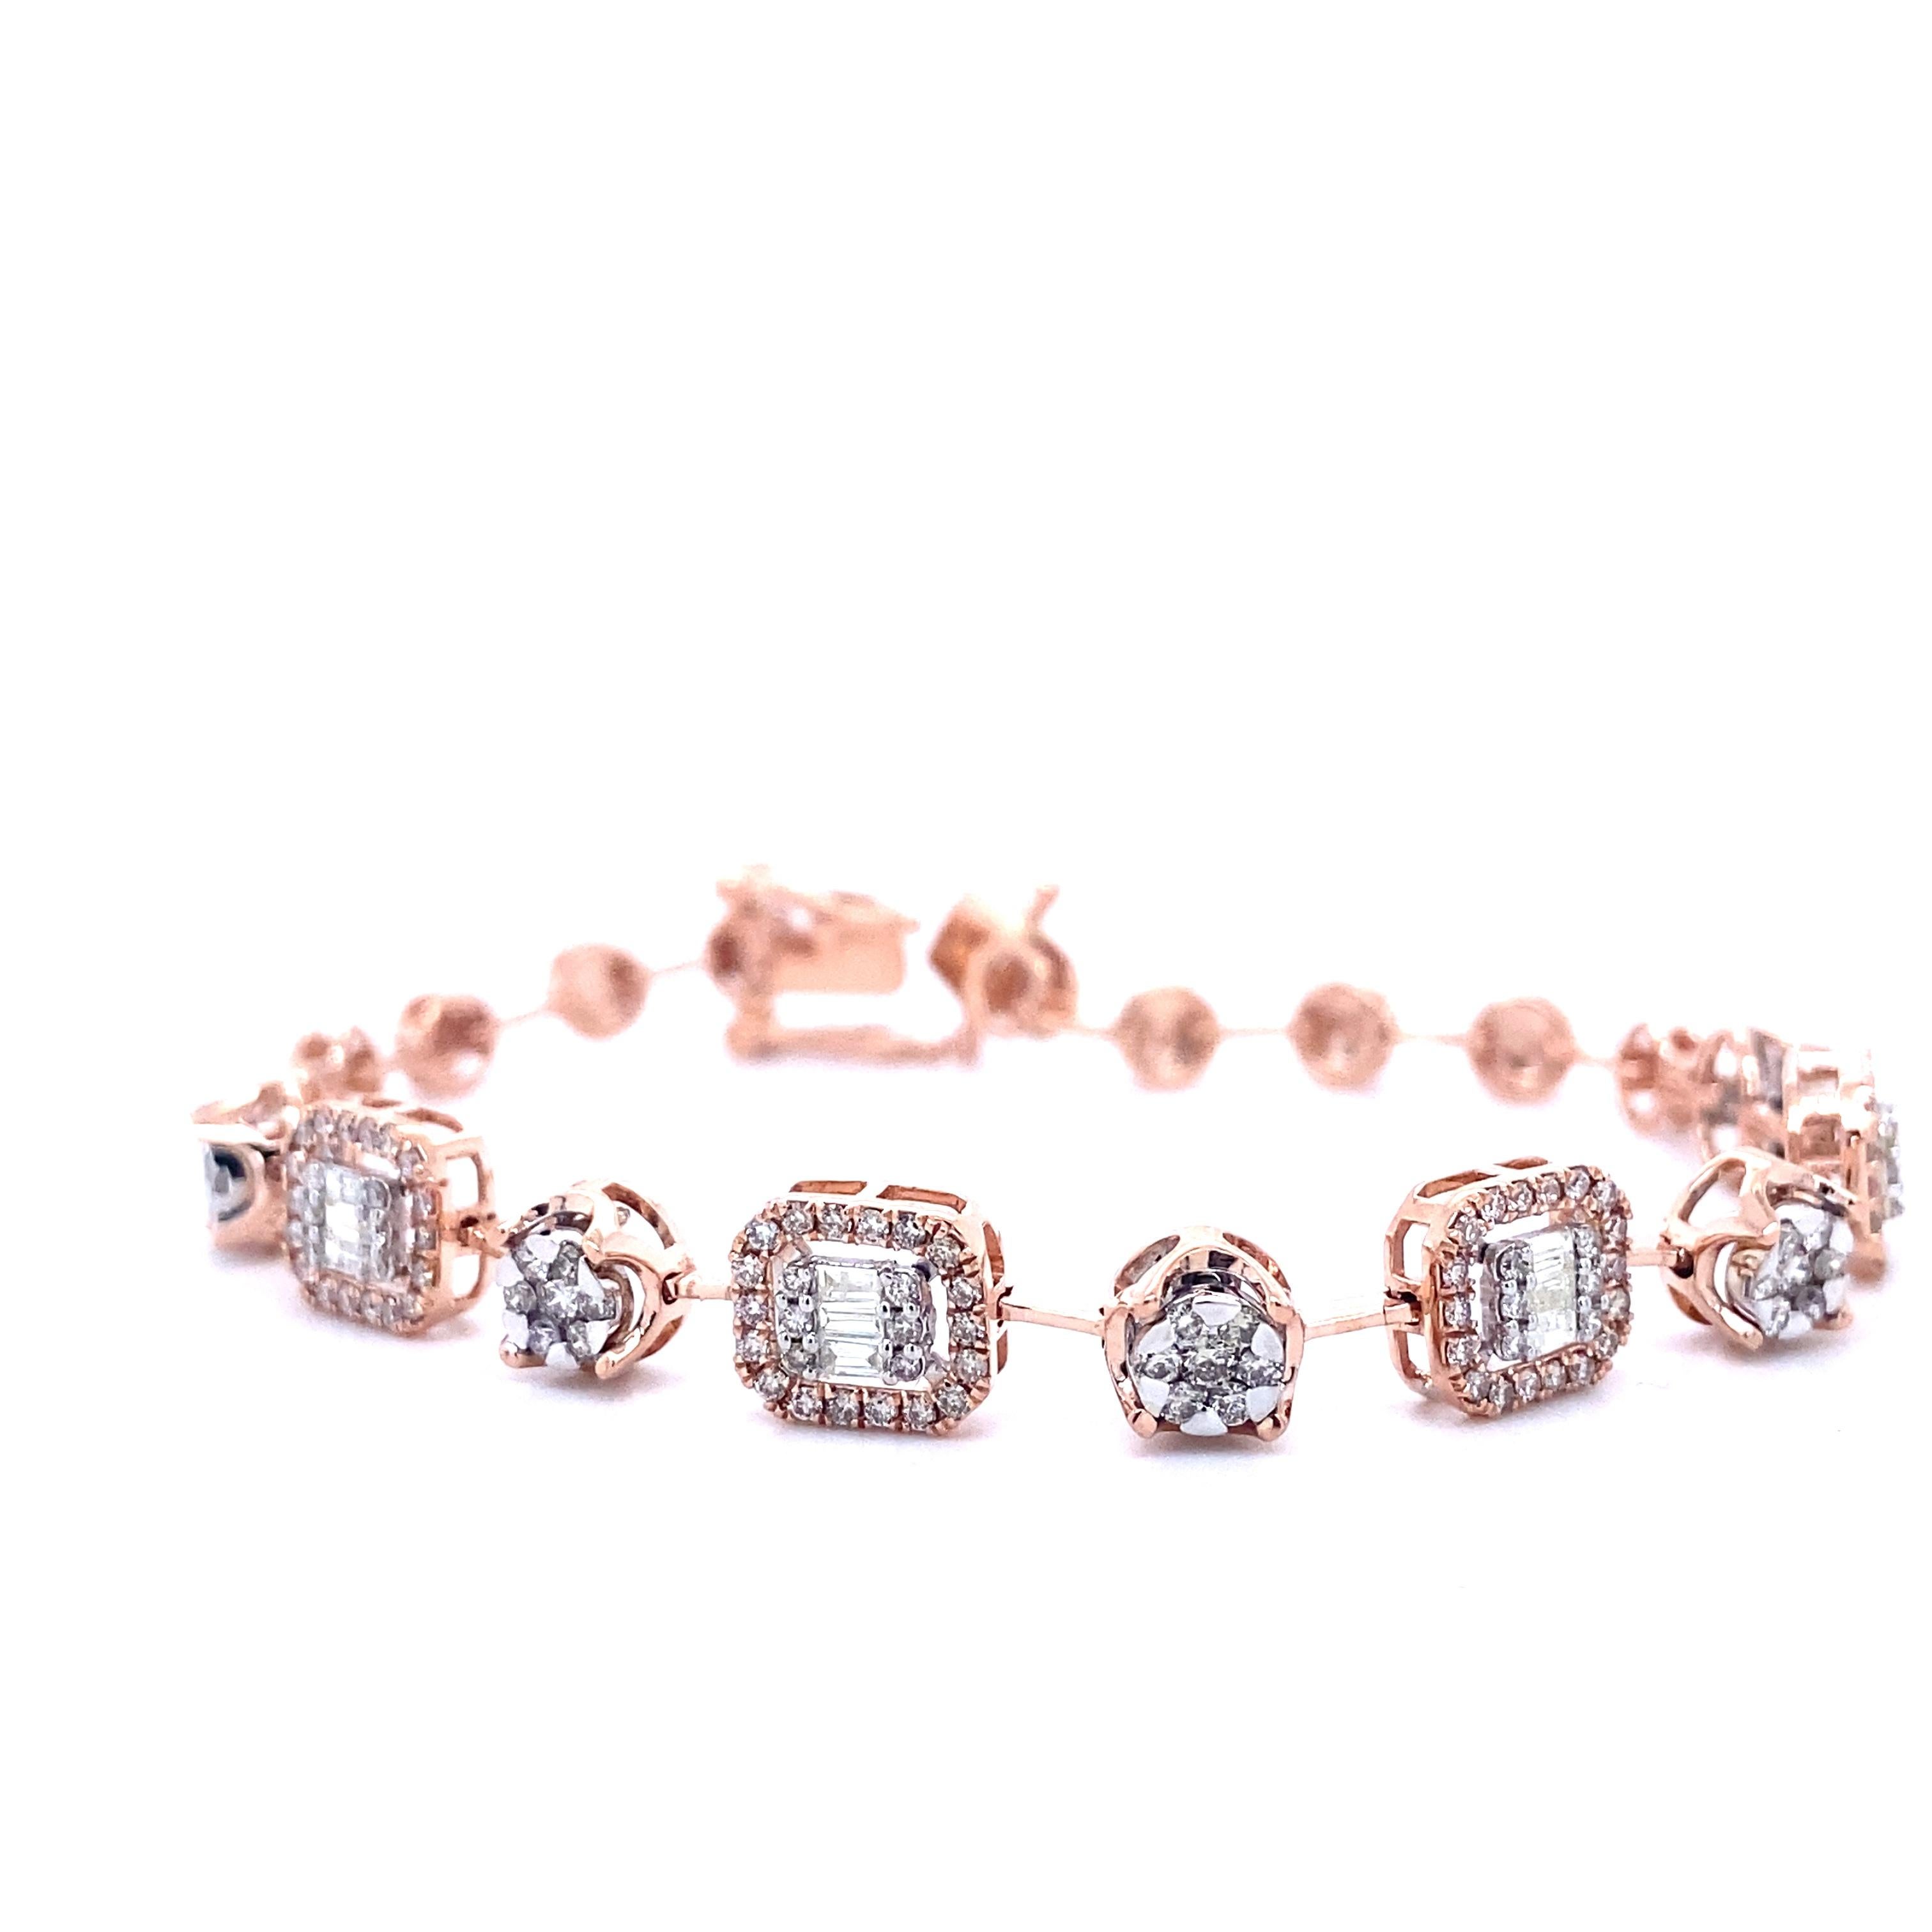 The Round & Baguette Diamond bracelet With Illusion Setting is crafted from 18k solid gold. It is composed of a series of ornate links, each adorned with diamonds, giving the piece a sparkling and sophisticated look. The central stones are